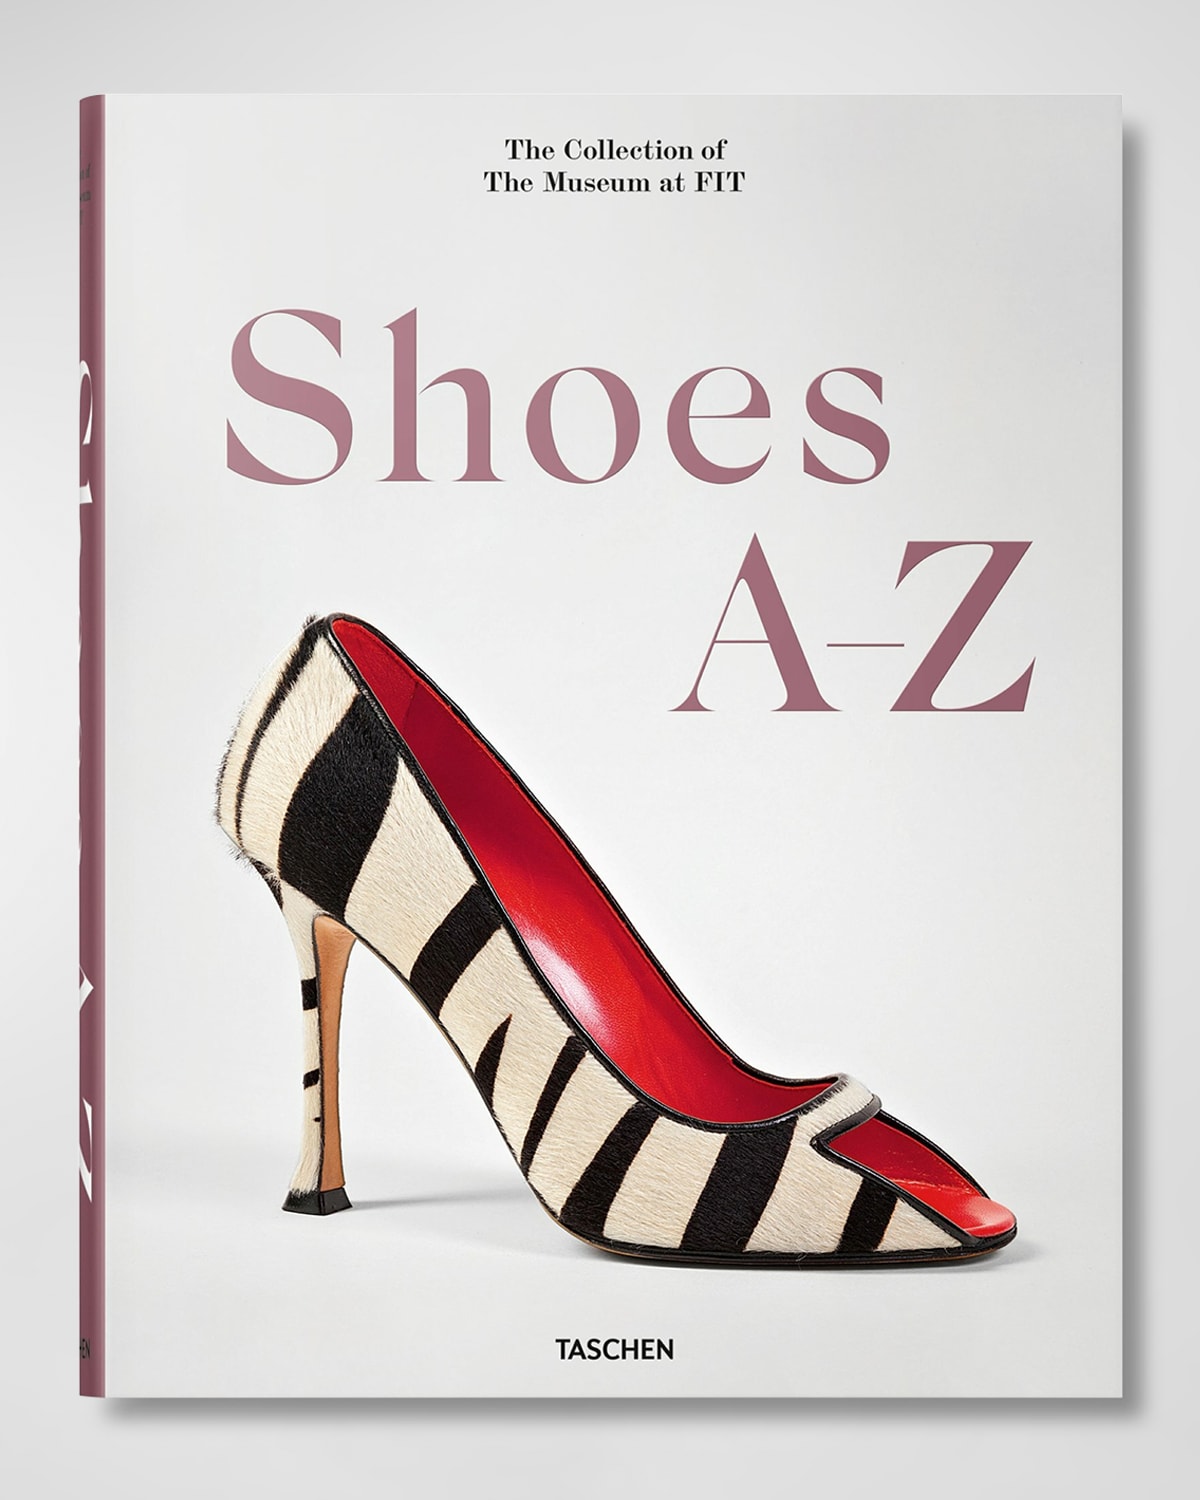 Shop Taschen Shoes A-z. The Collection Of The Museum At Fit Book By Colleen Hill And Valerie Steele